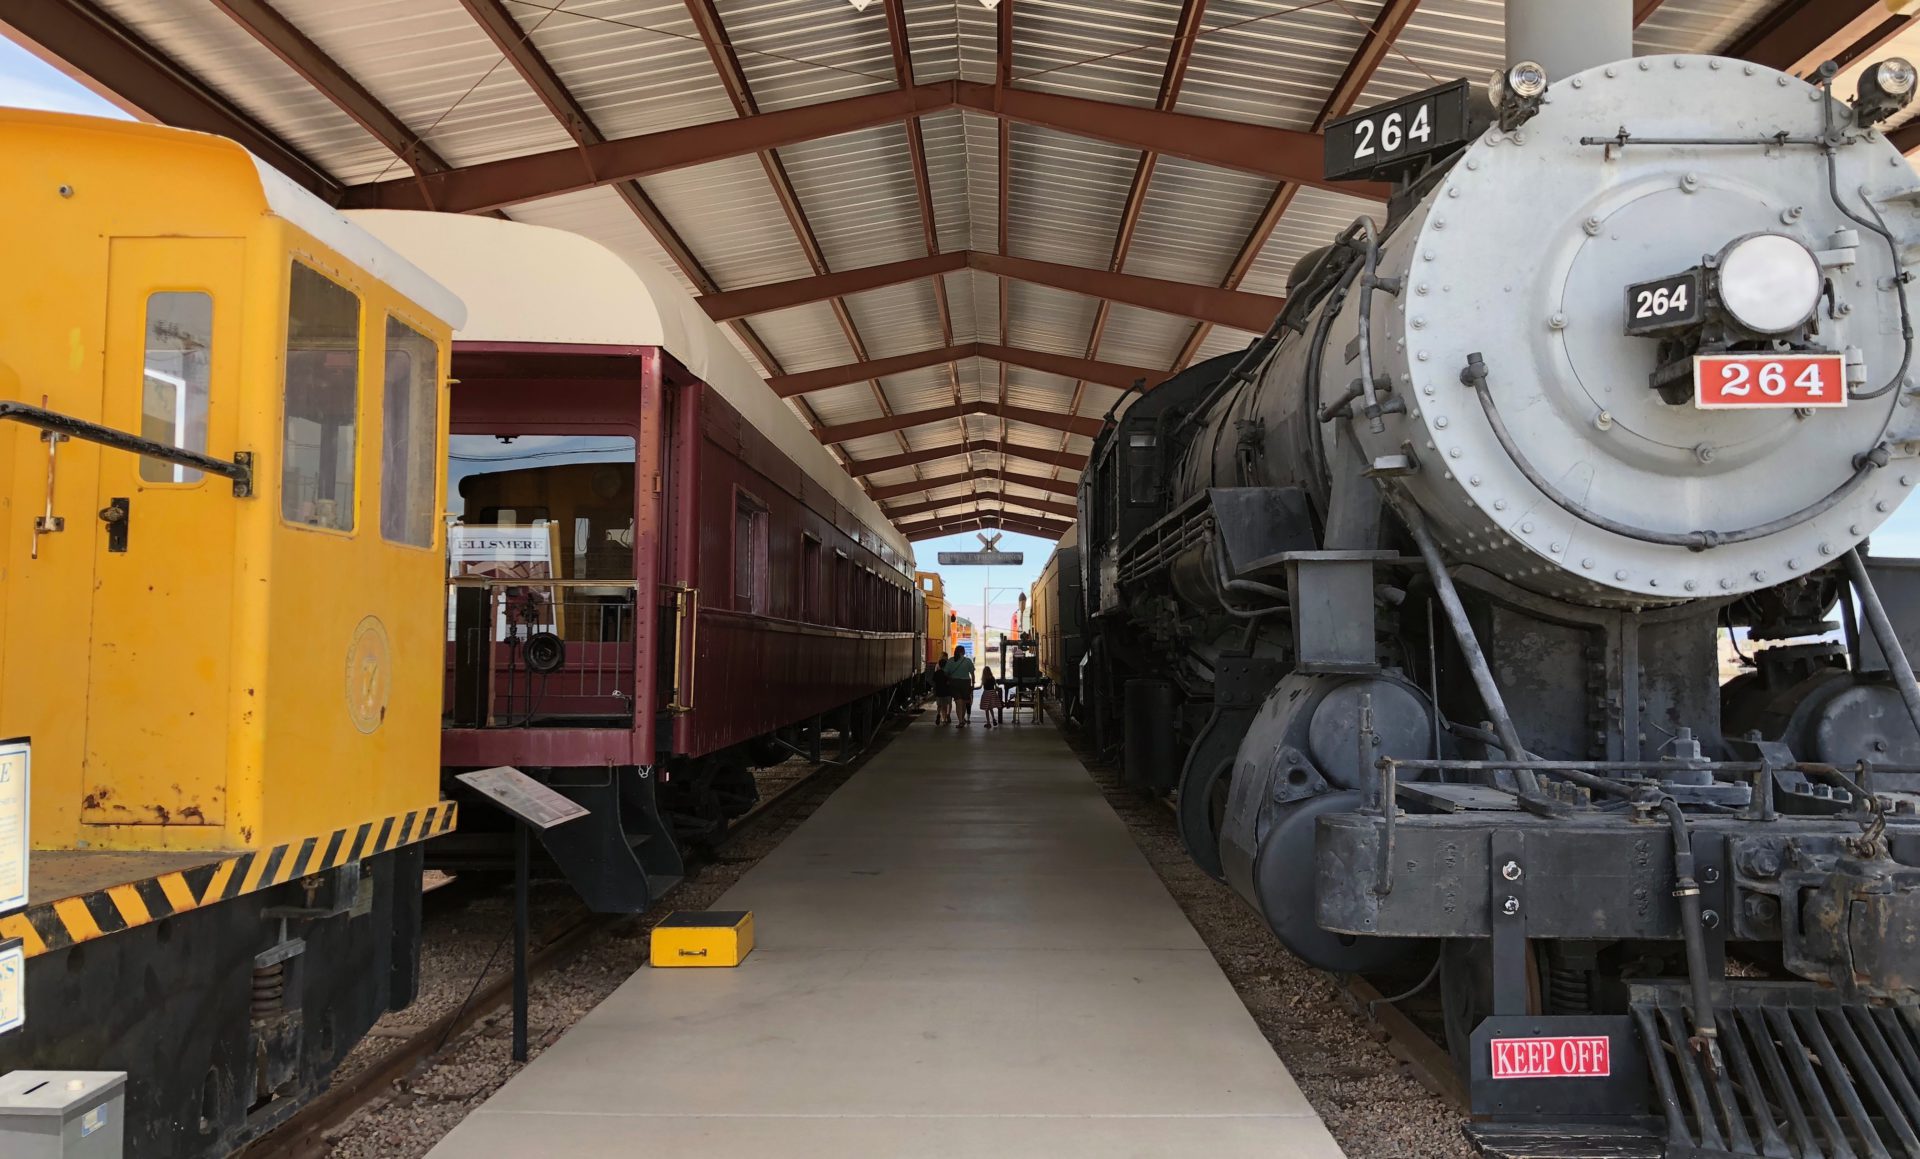 The Nevada State Railroad Museum walkaway where trains of various design and colors appear such as yellow, red and a vintage gray one